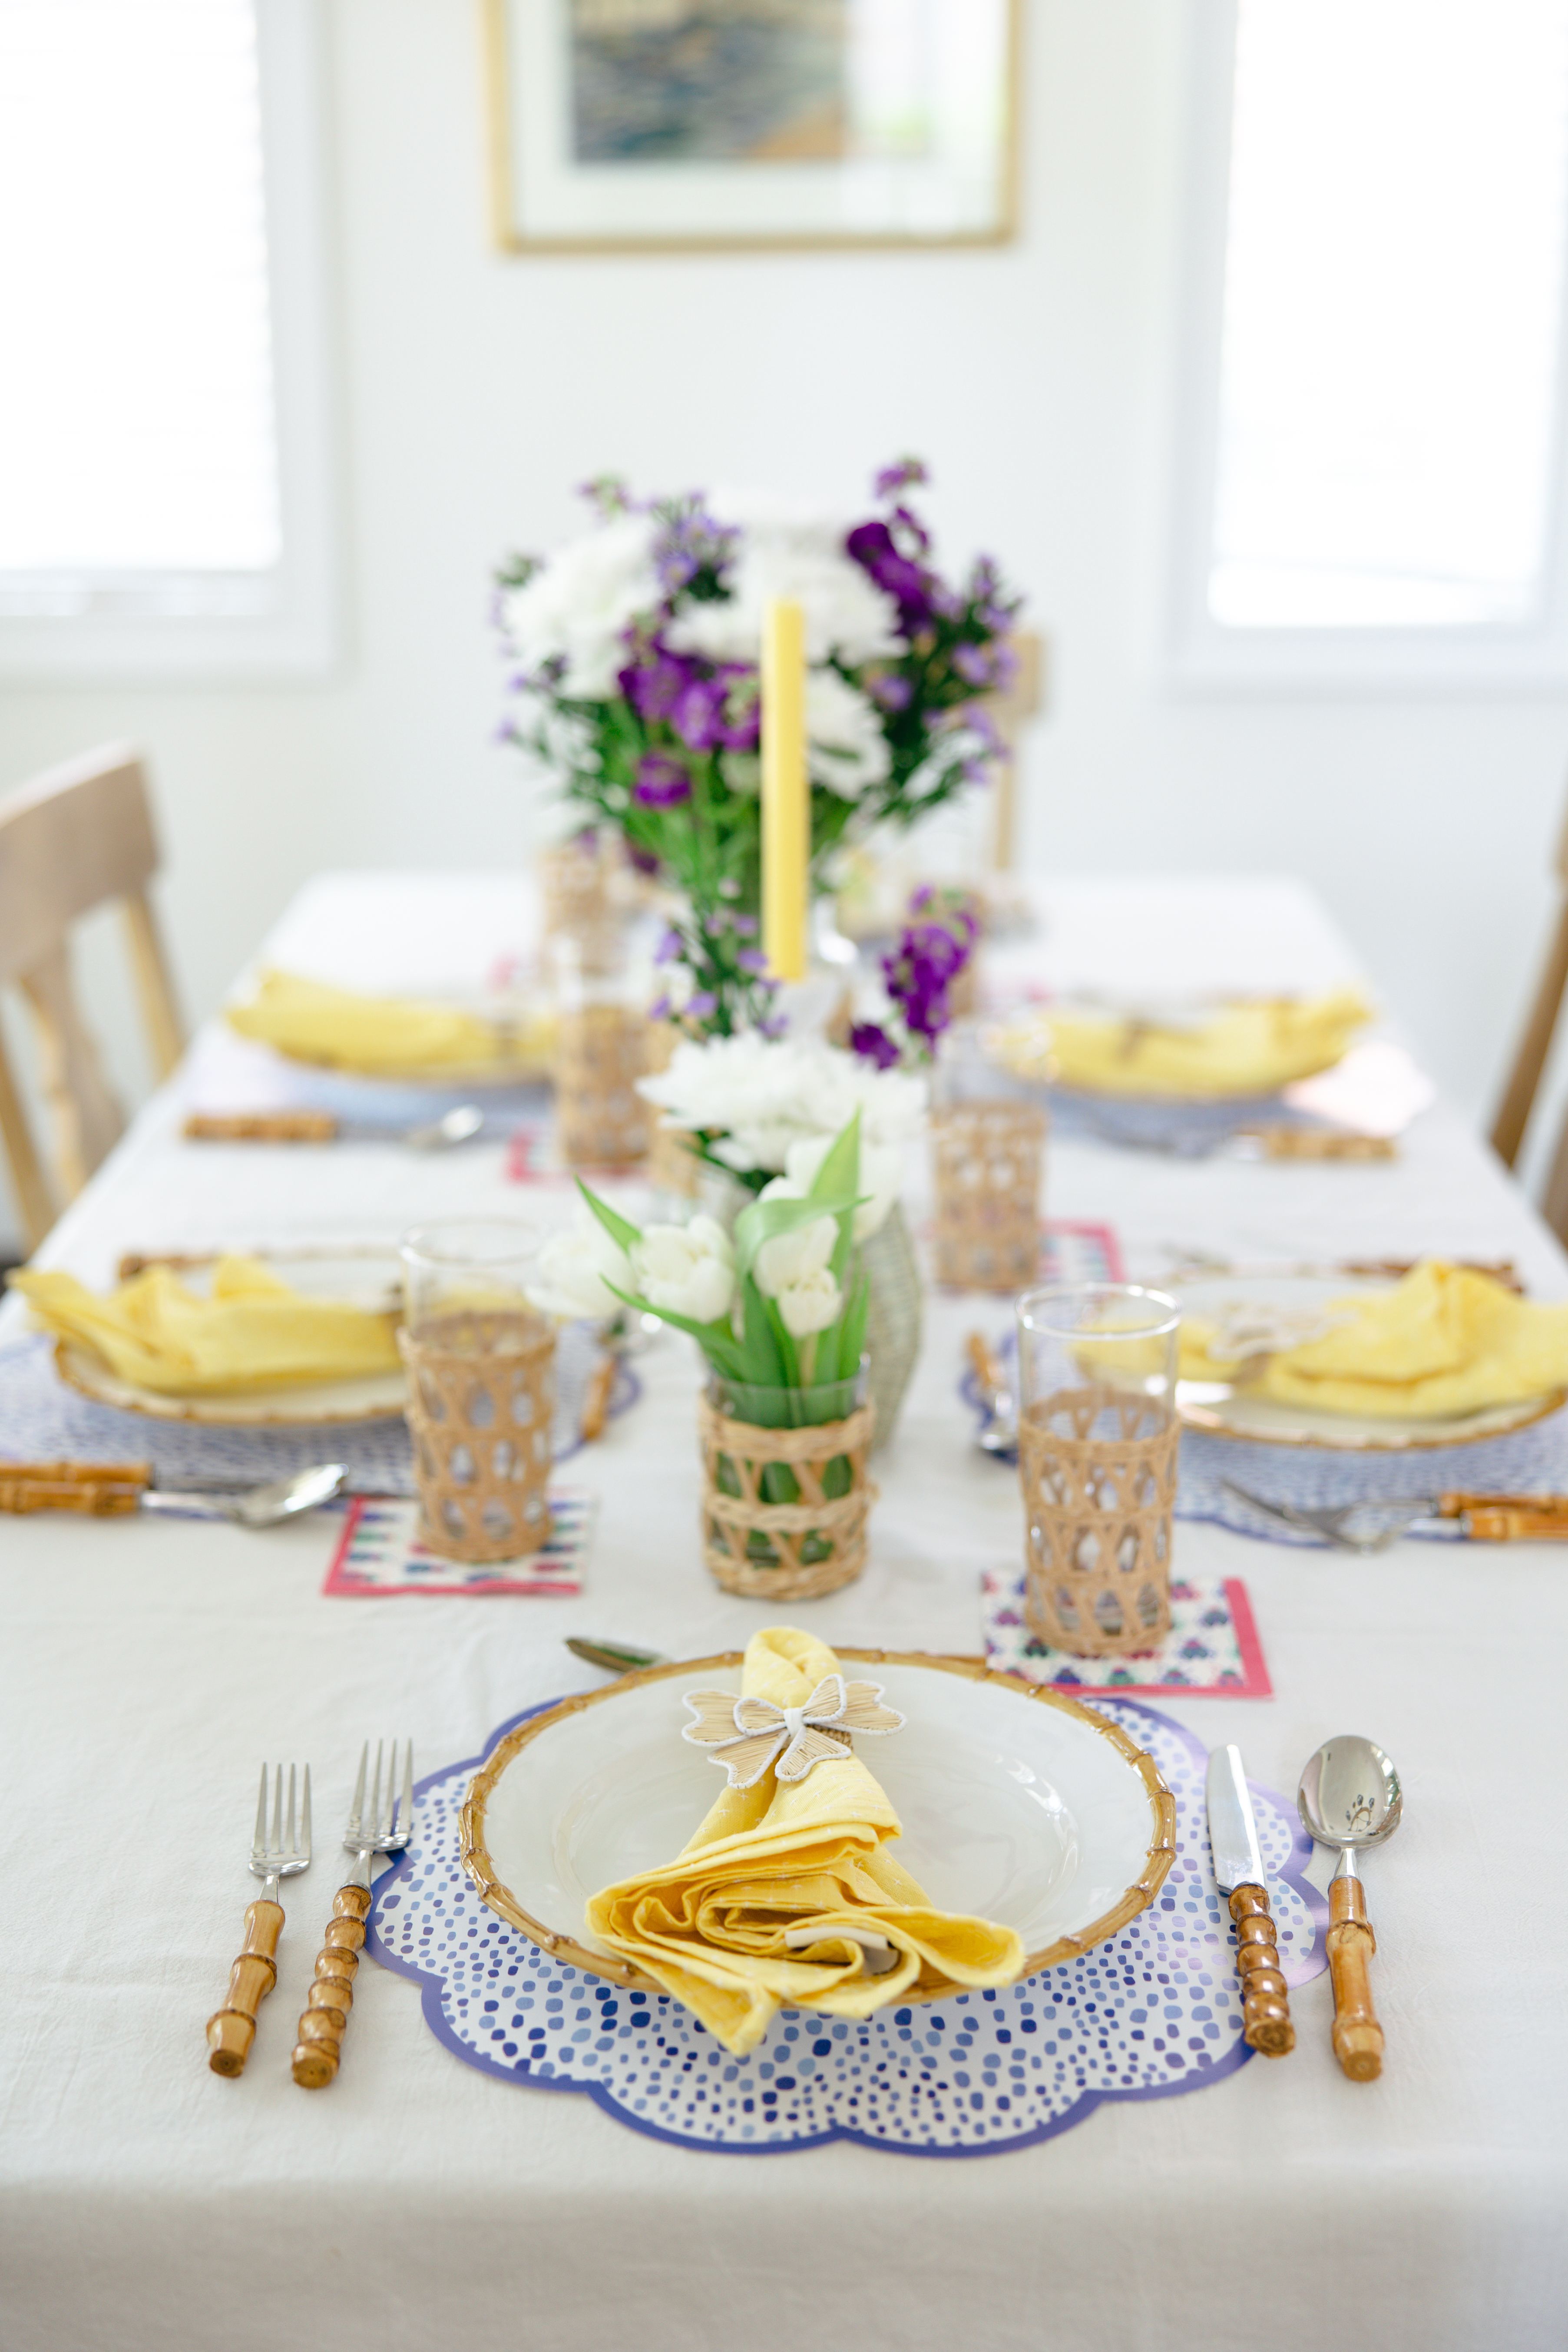 Table set with purple ikat placemats, bright yellow napkins and white and purple flowers as a centerpiece.